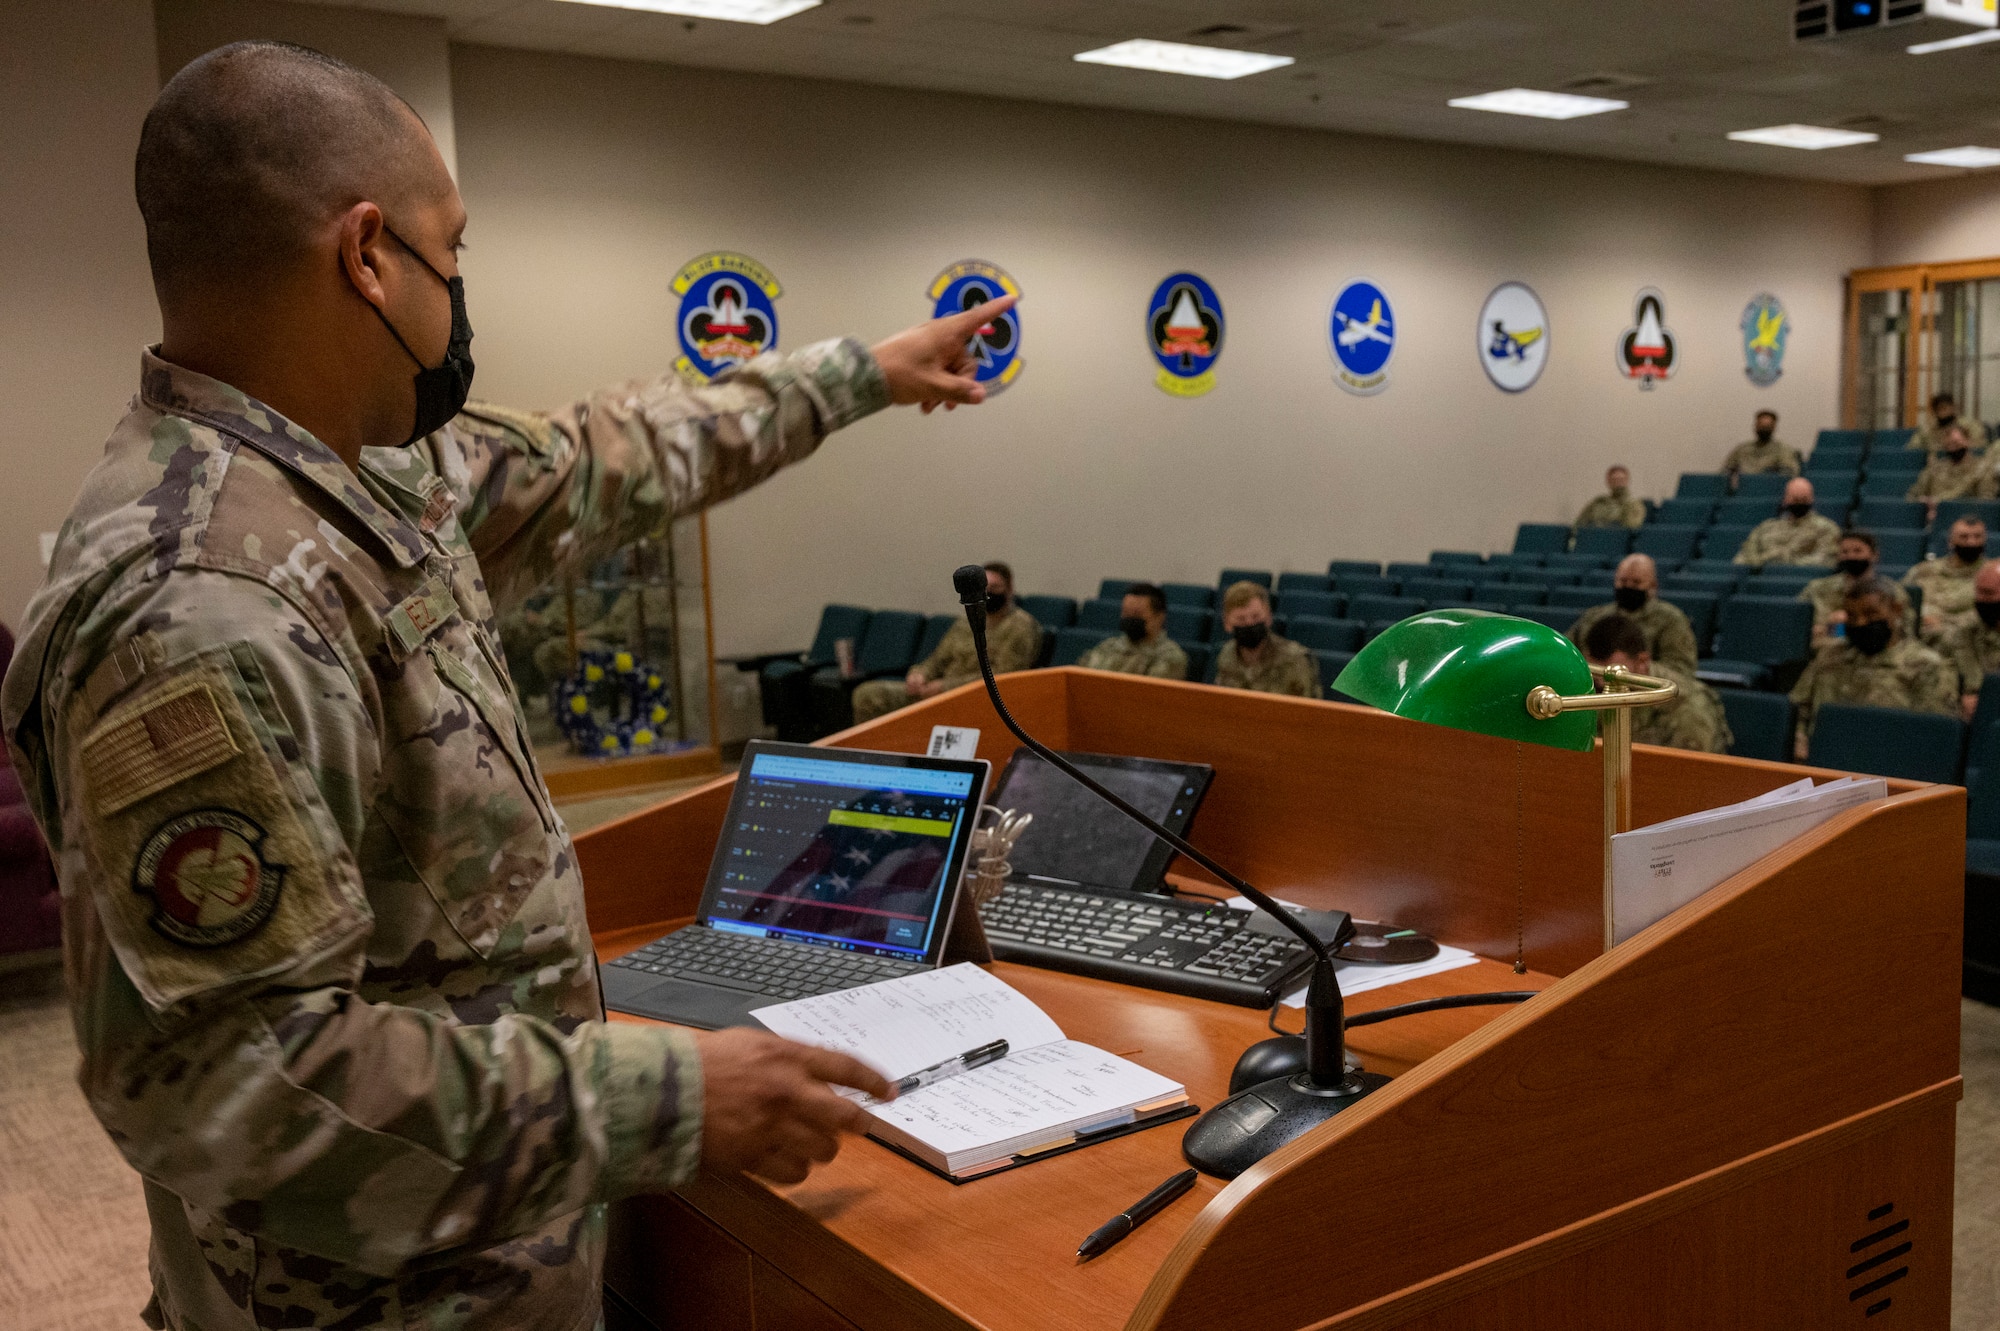 An Airman speaks to an audience